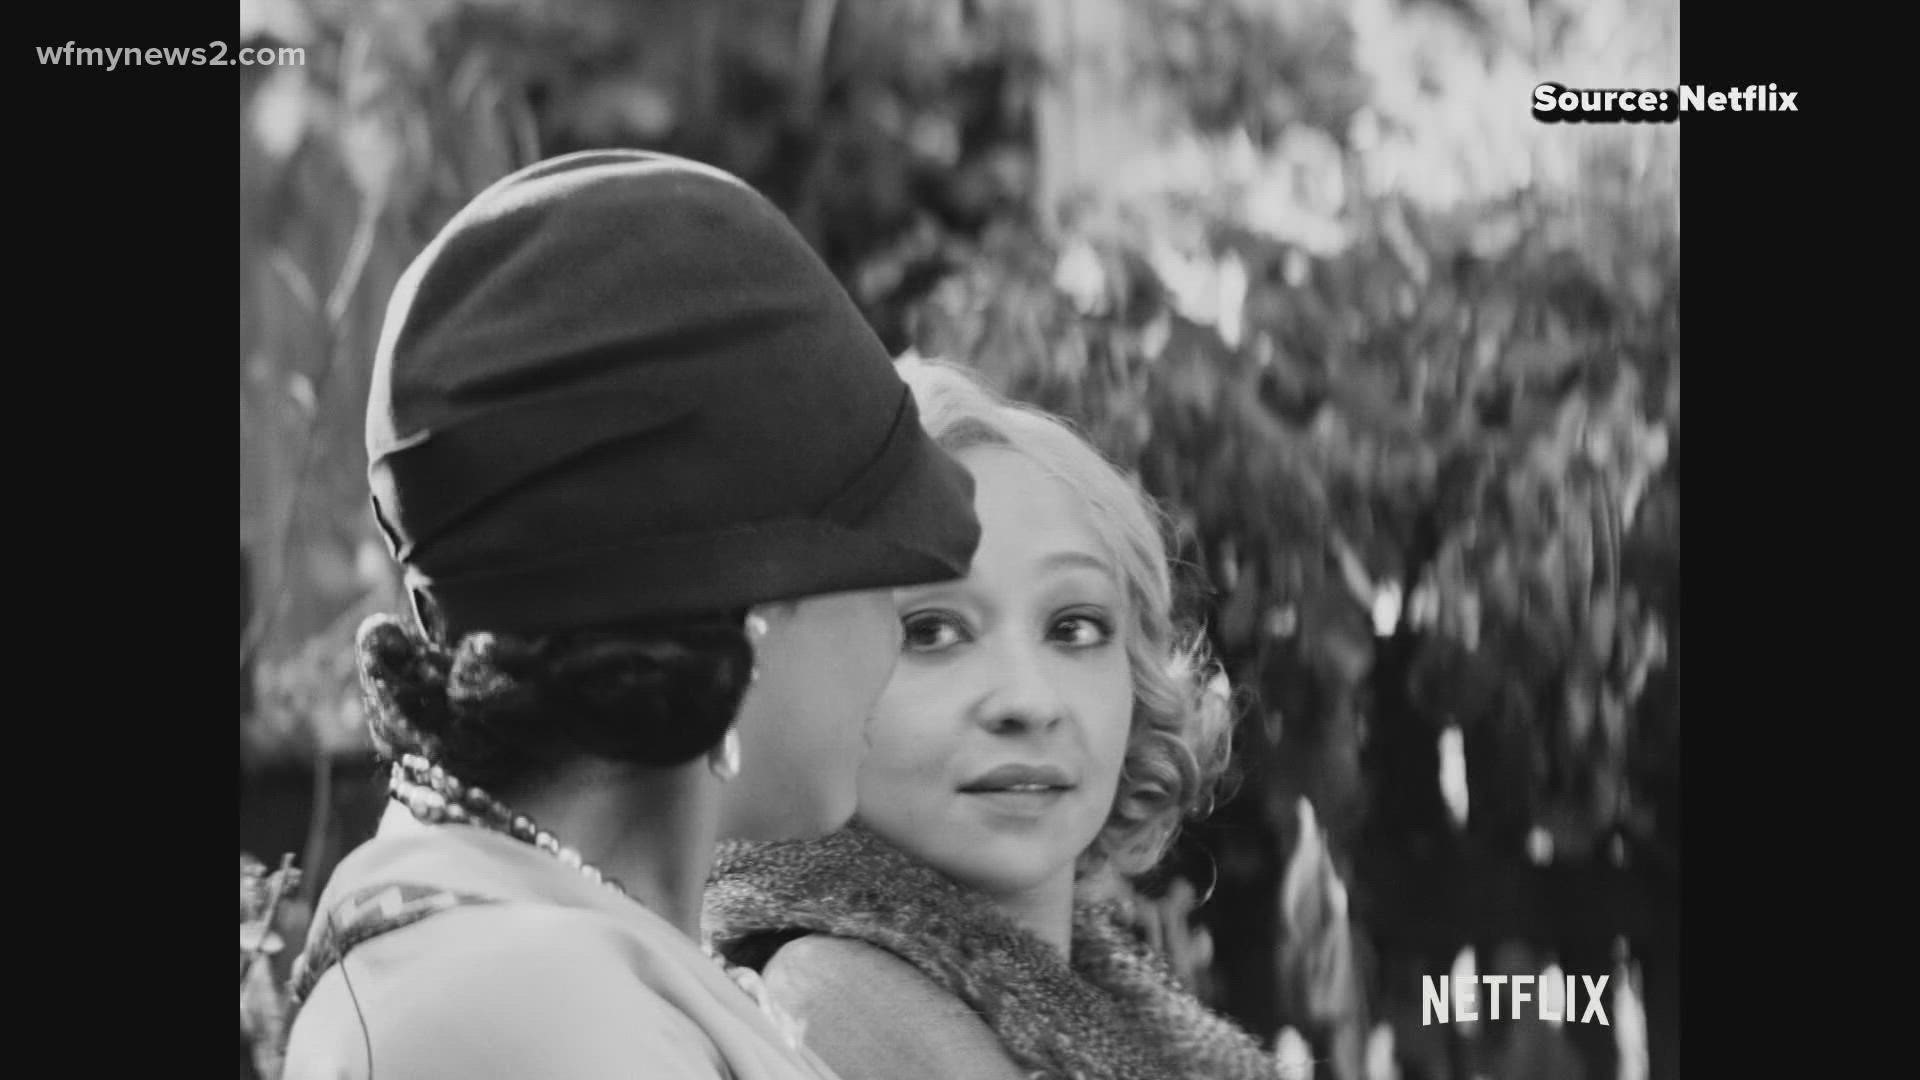 “Passing” is about an upper-class 1920s black woman who passes off as white in society.